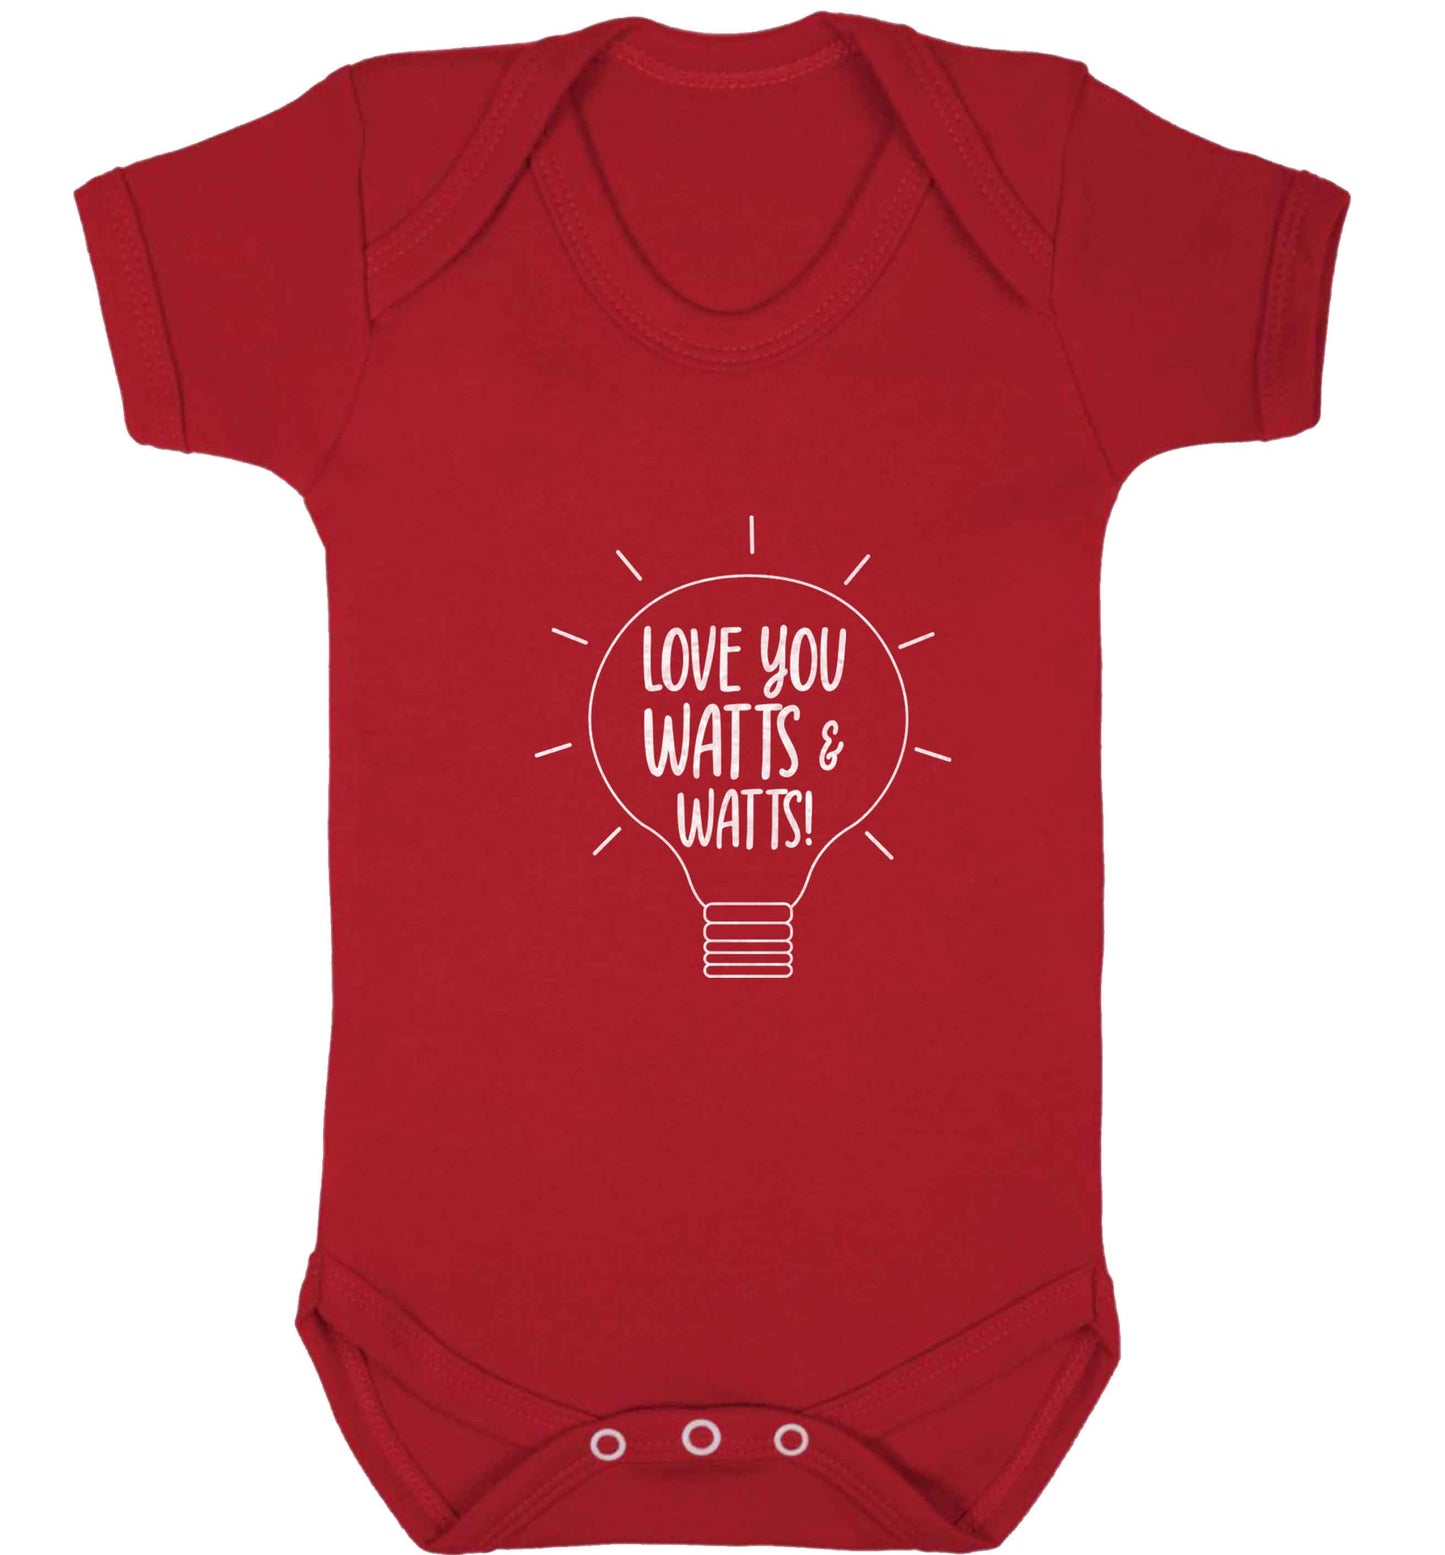 I love you watts and watts baby vest red 18-24 months